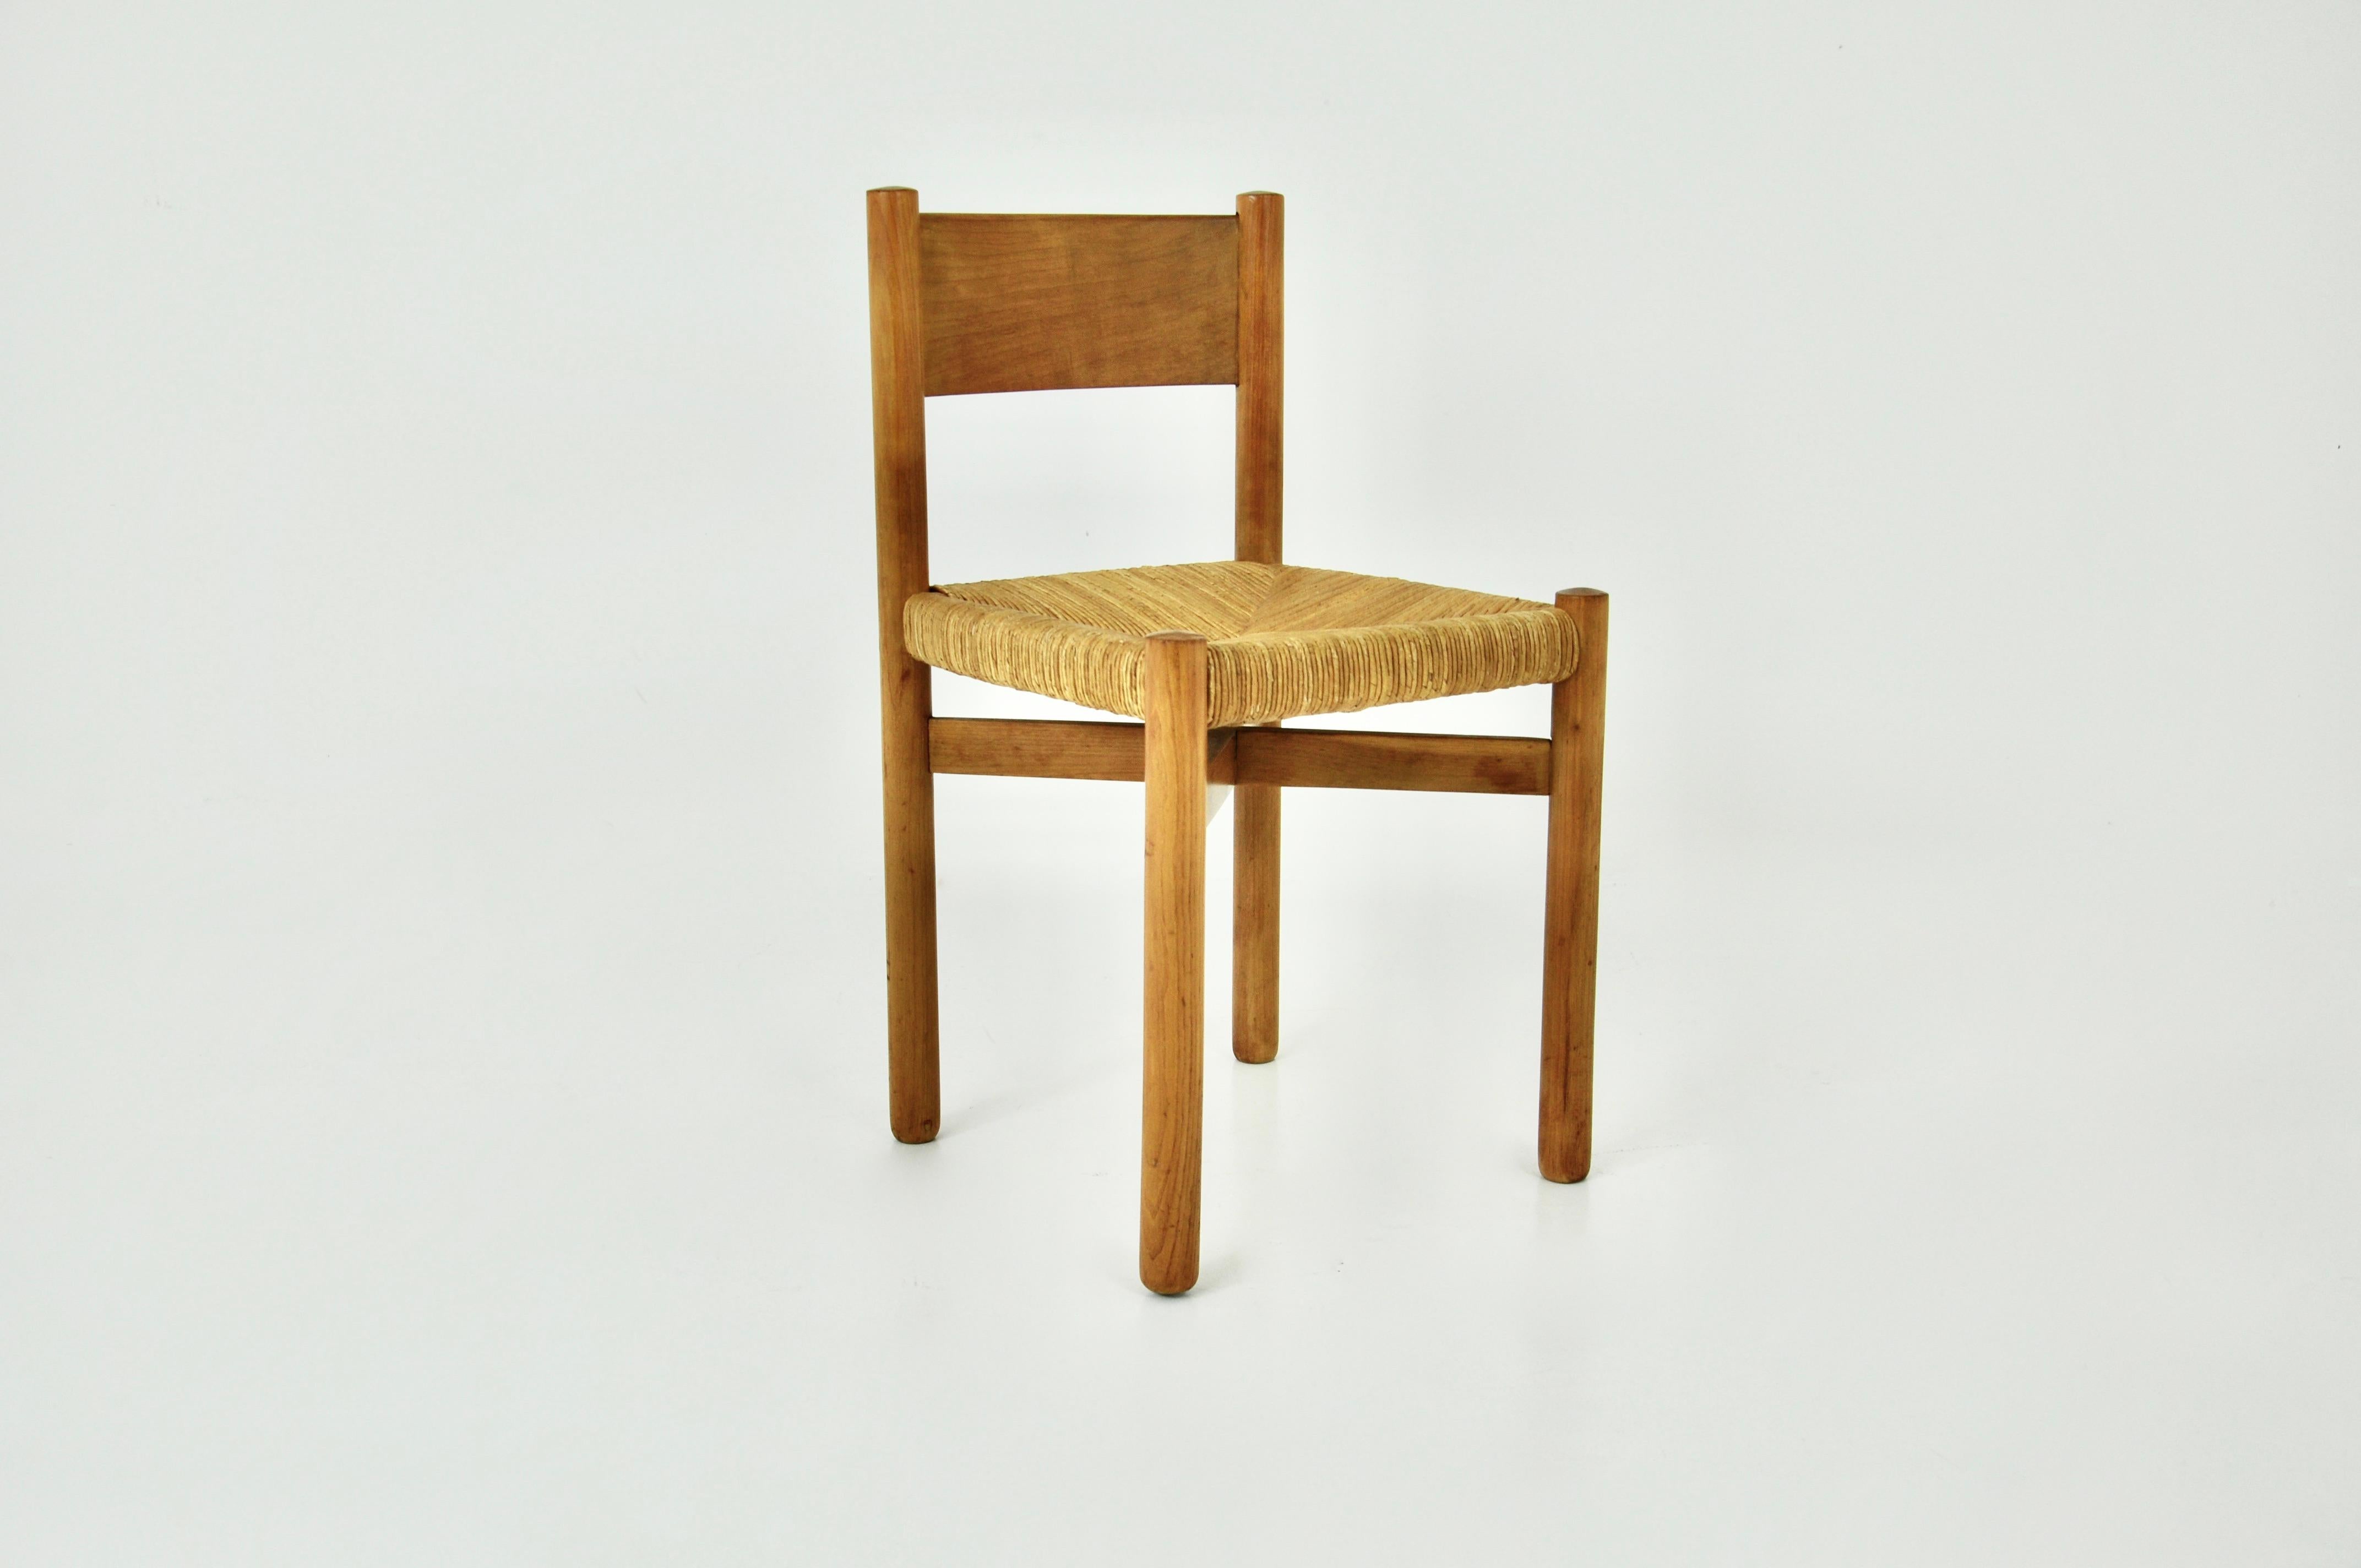 Wooden chair with straw seat designed by Charlotte Perriand in the 1950s, model: Meribel. Seat height: 46 cm. Wear due to time and age of the chair.